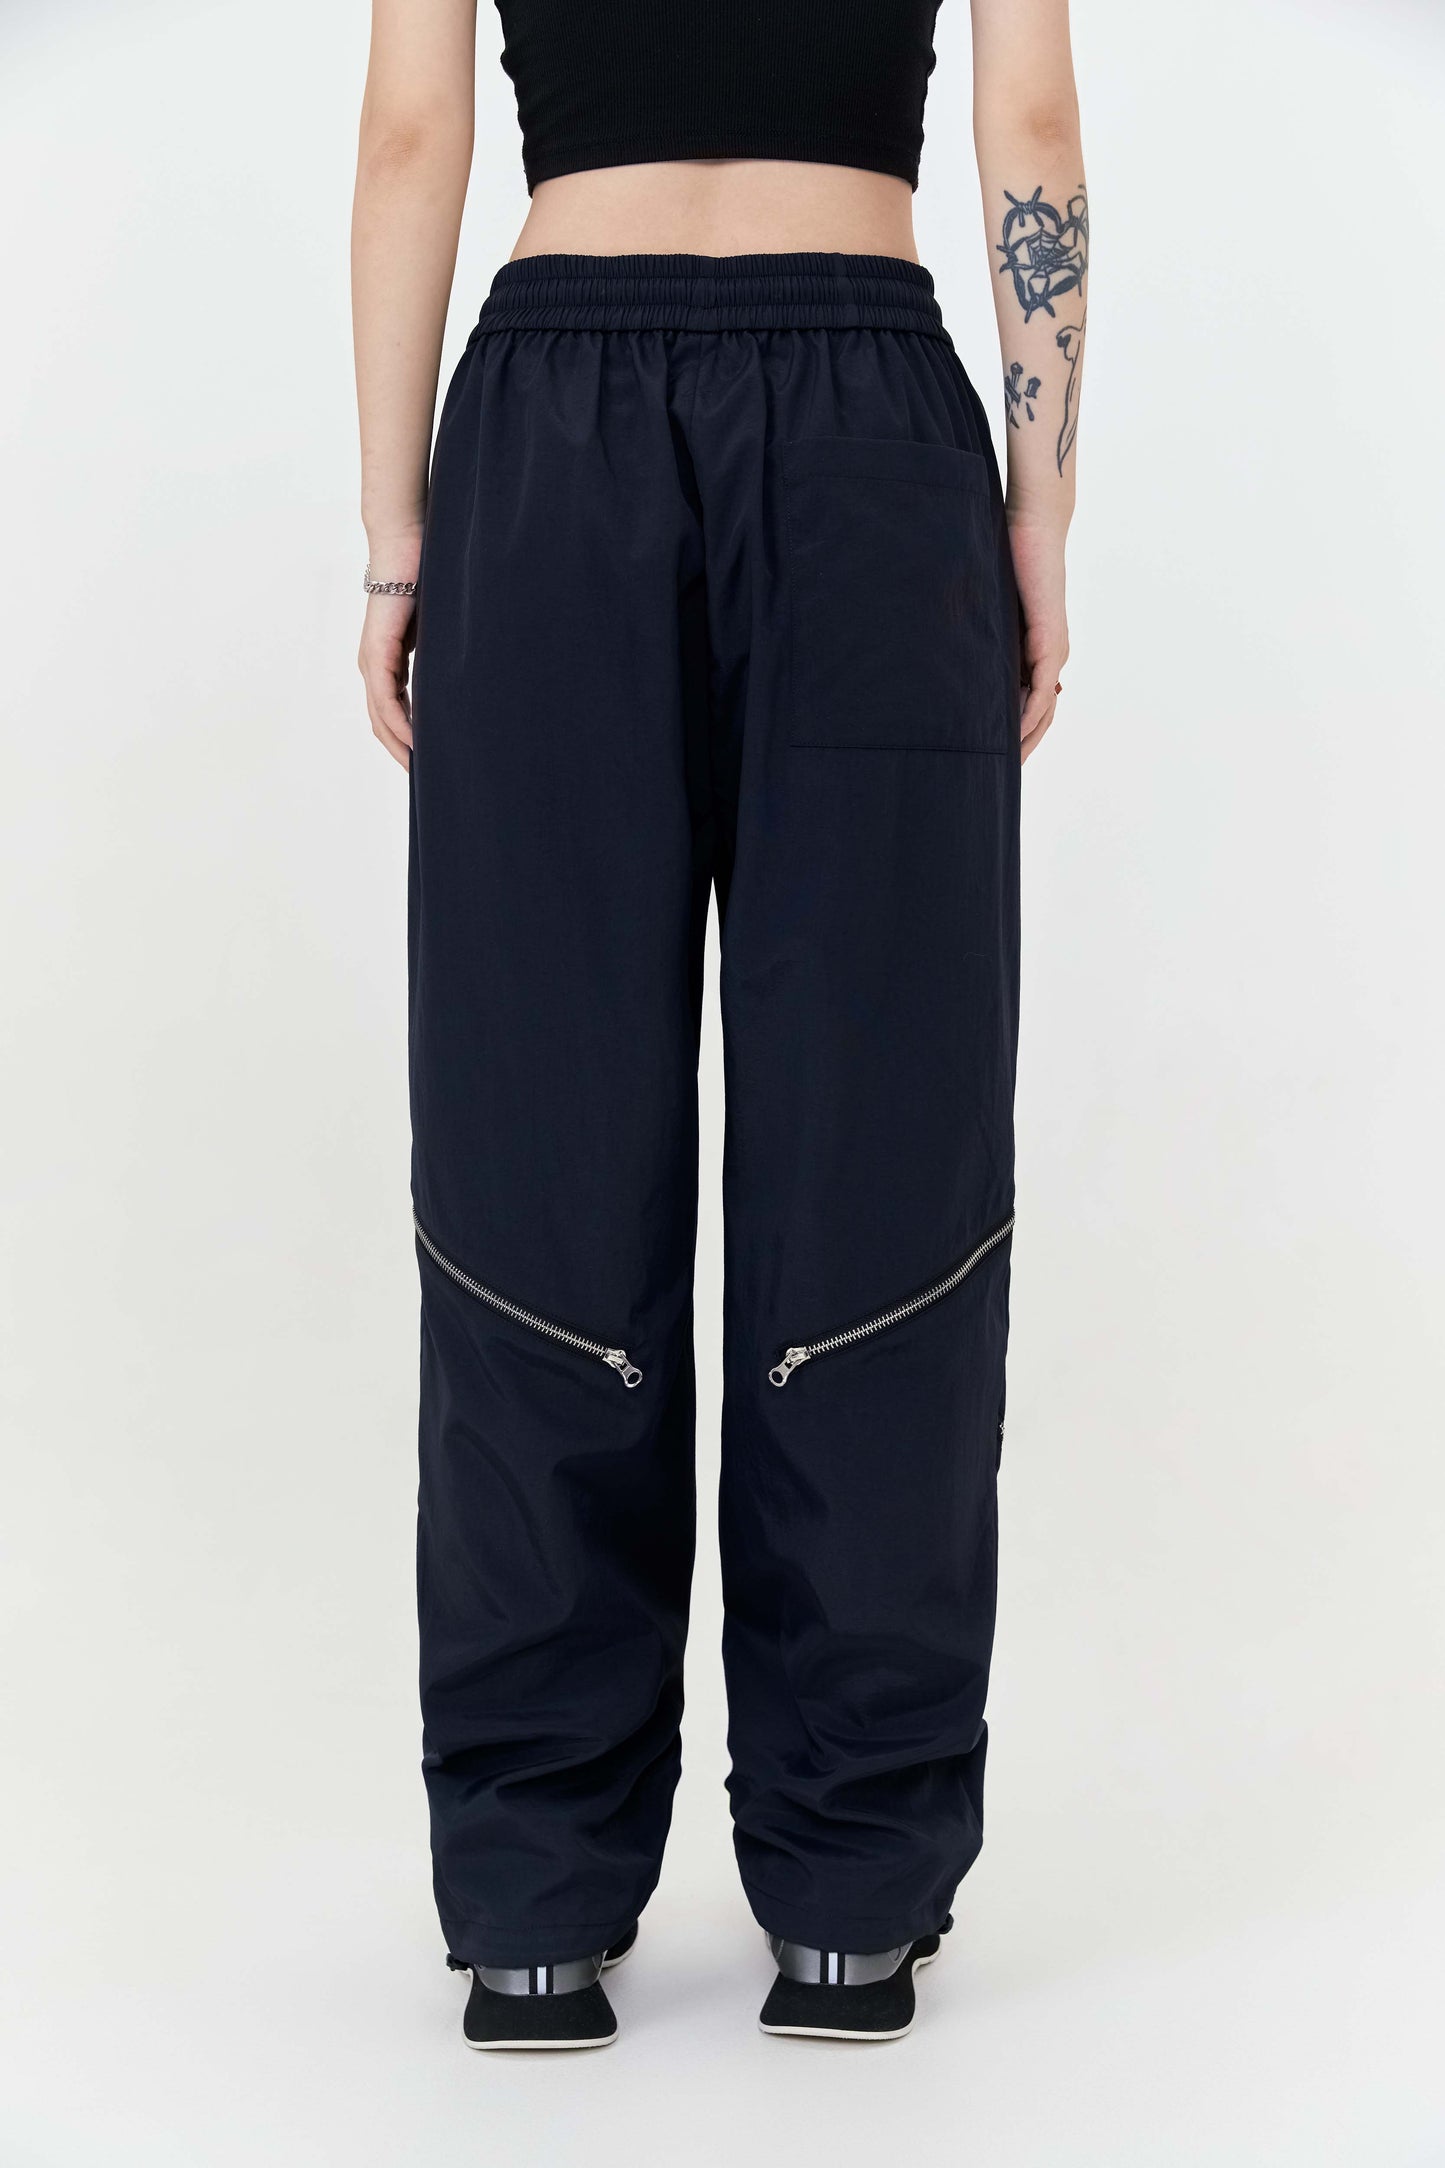 TWO LINES PANTS